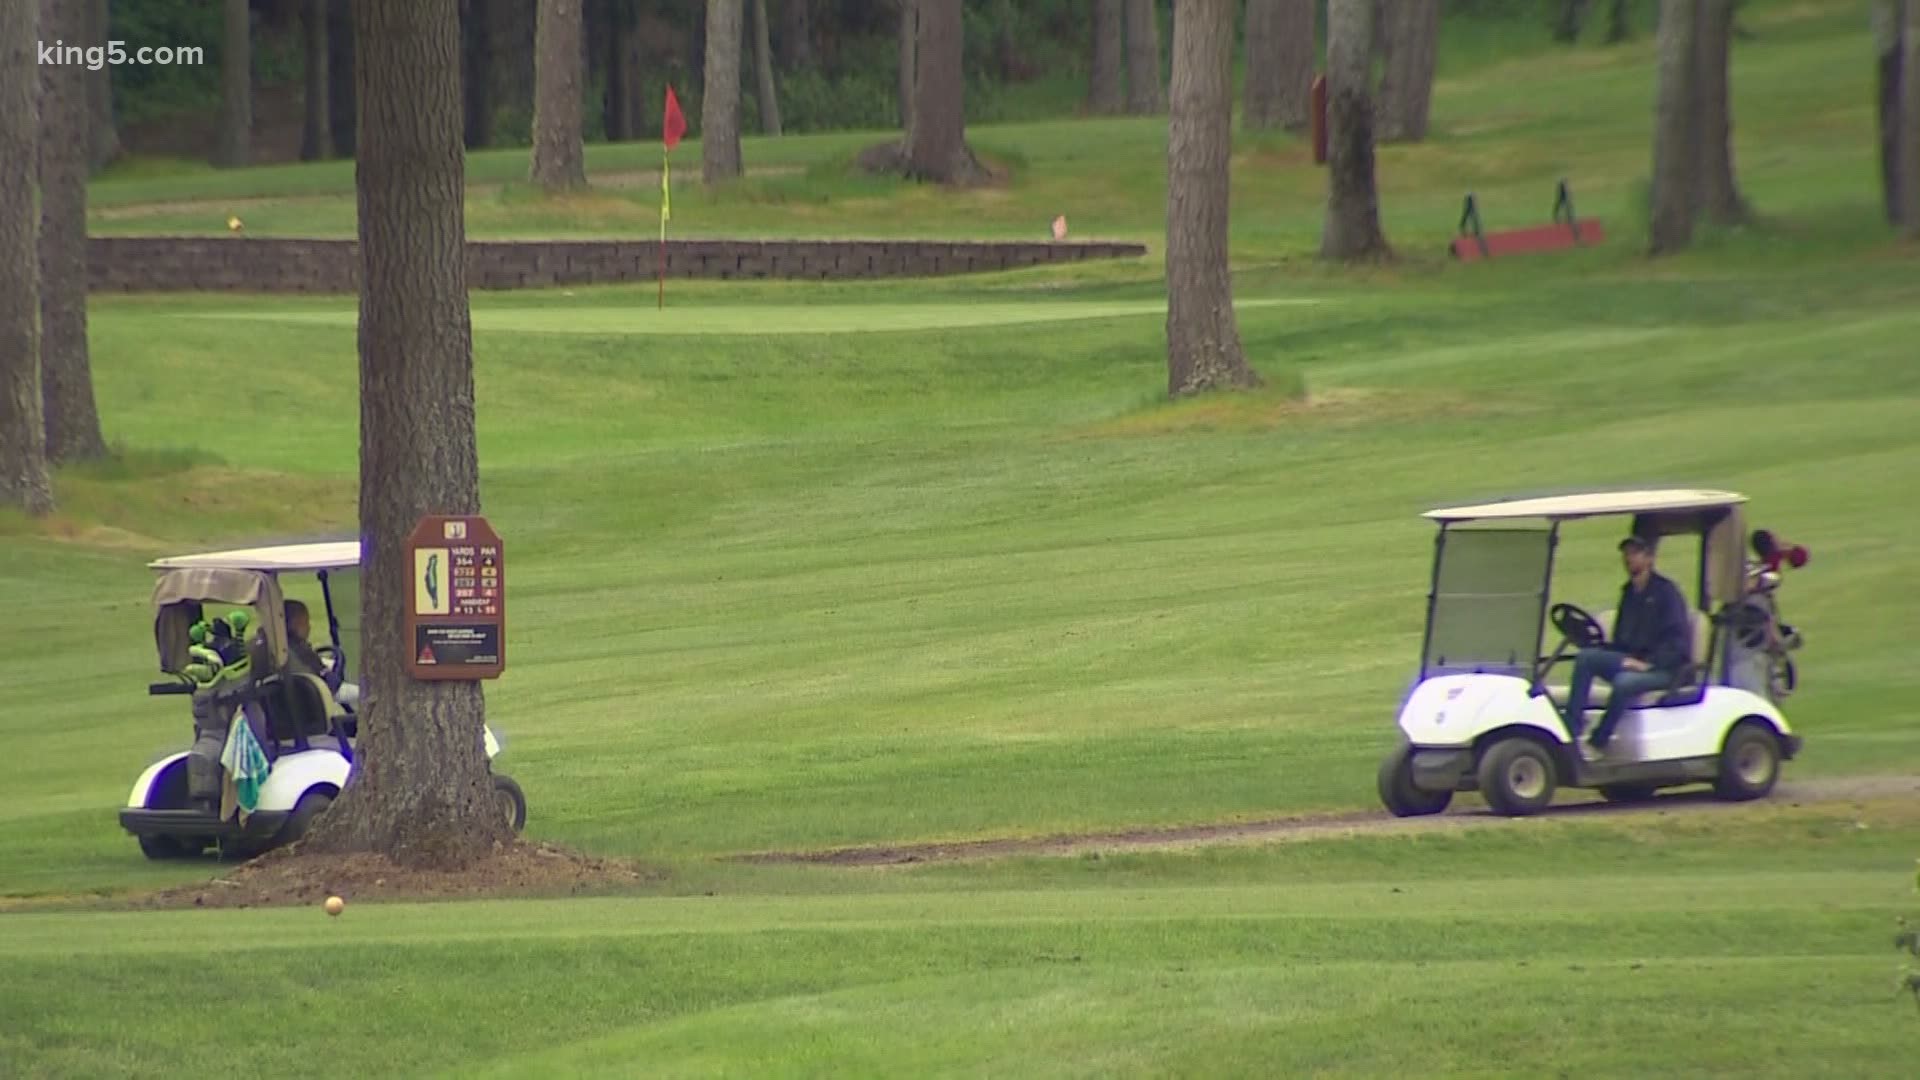 Golf courses can open on Tuesday but with some restrictions.